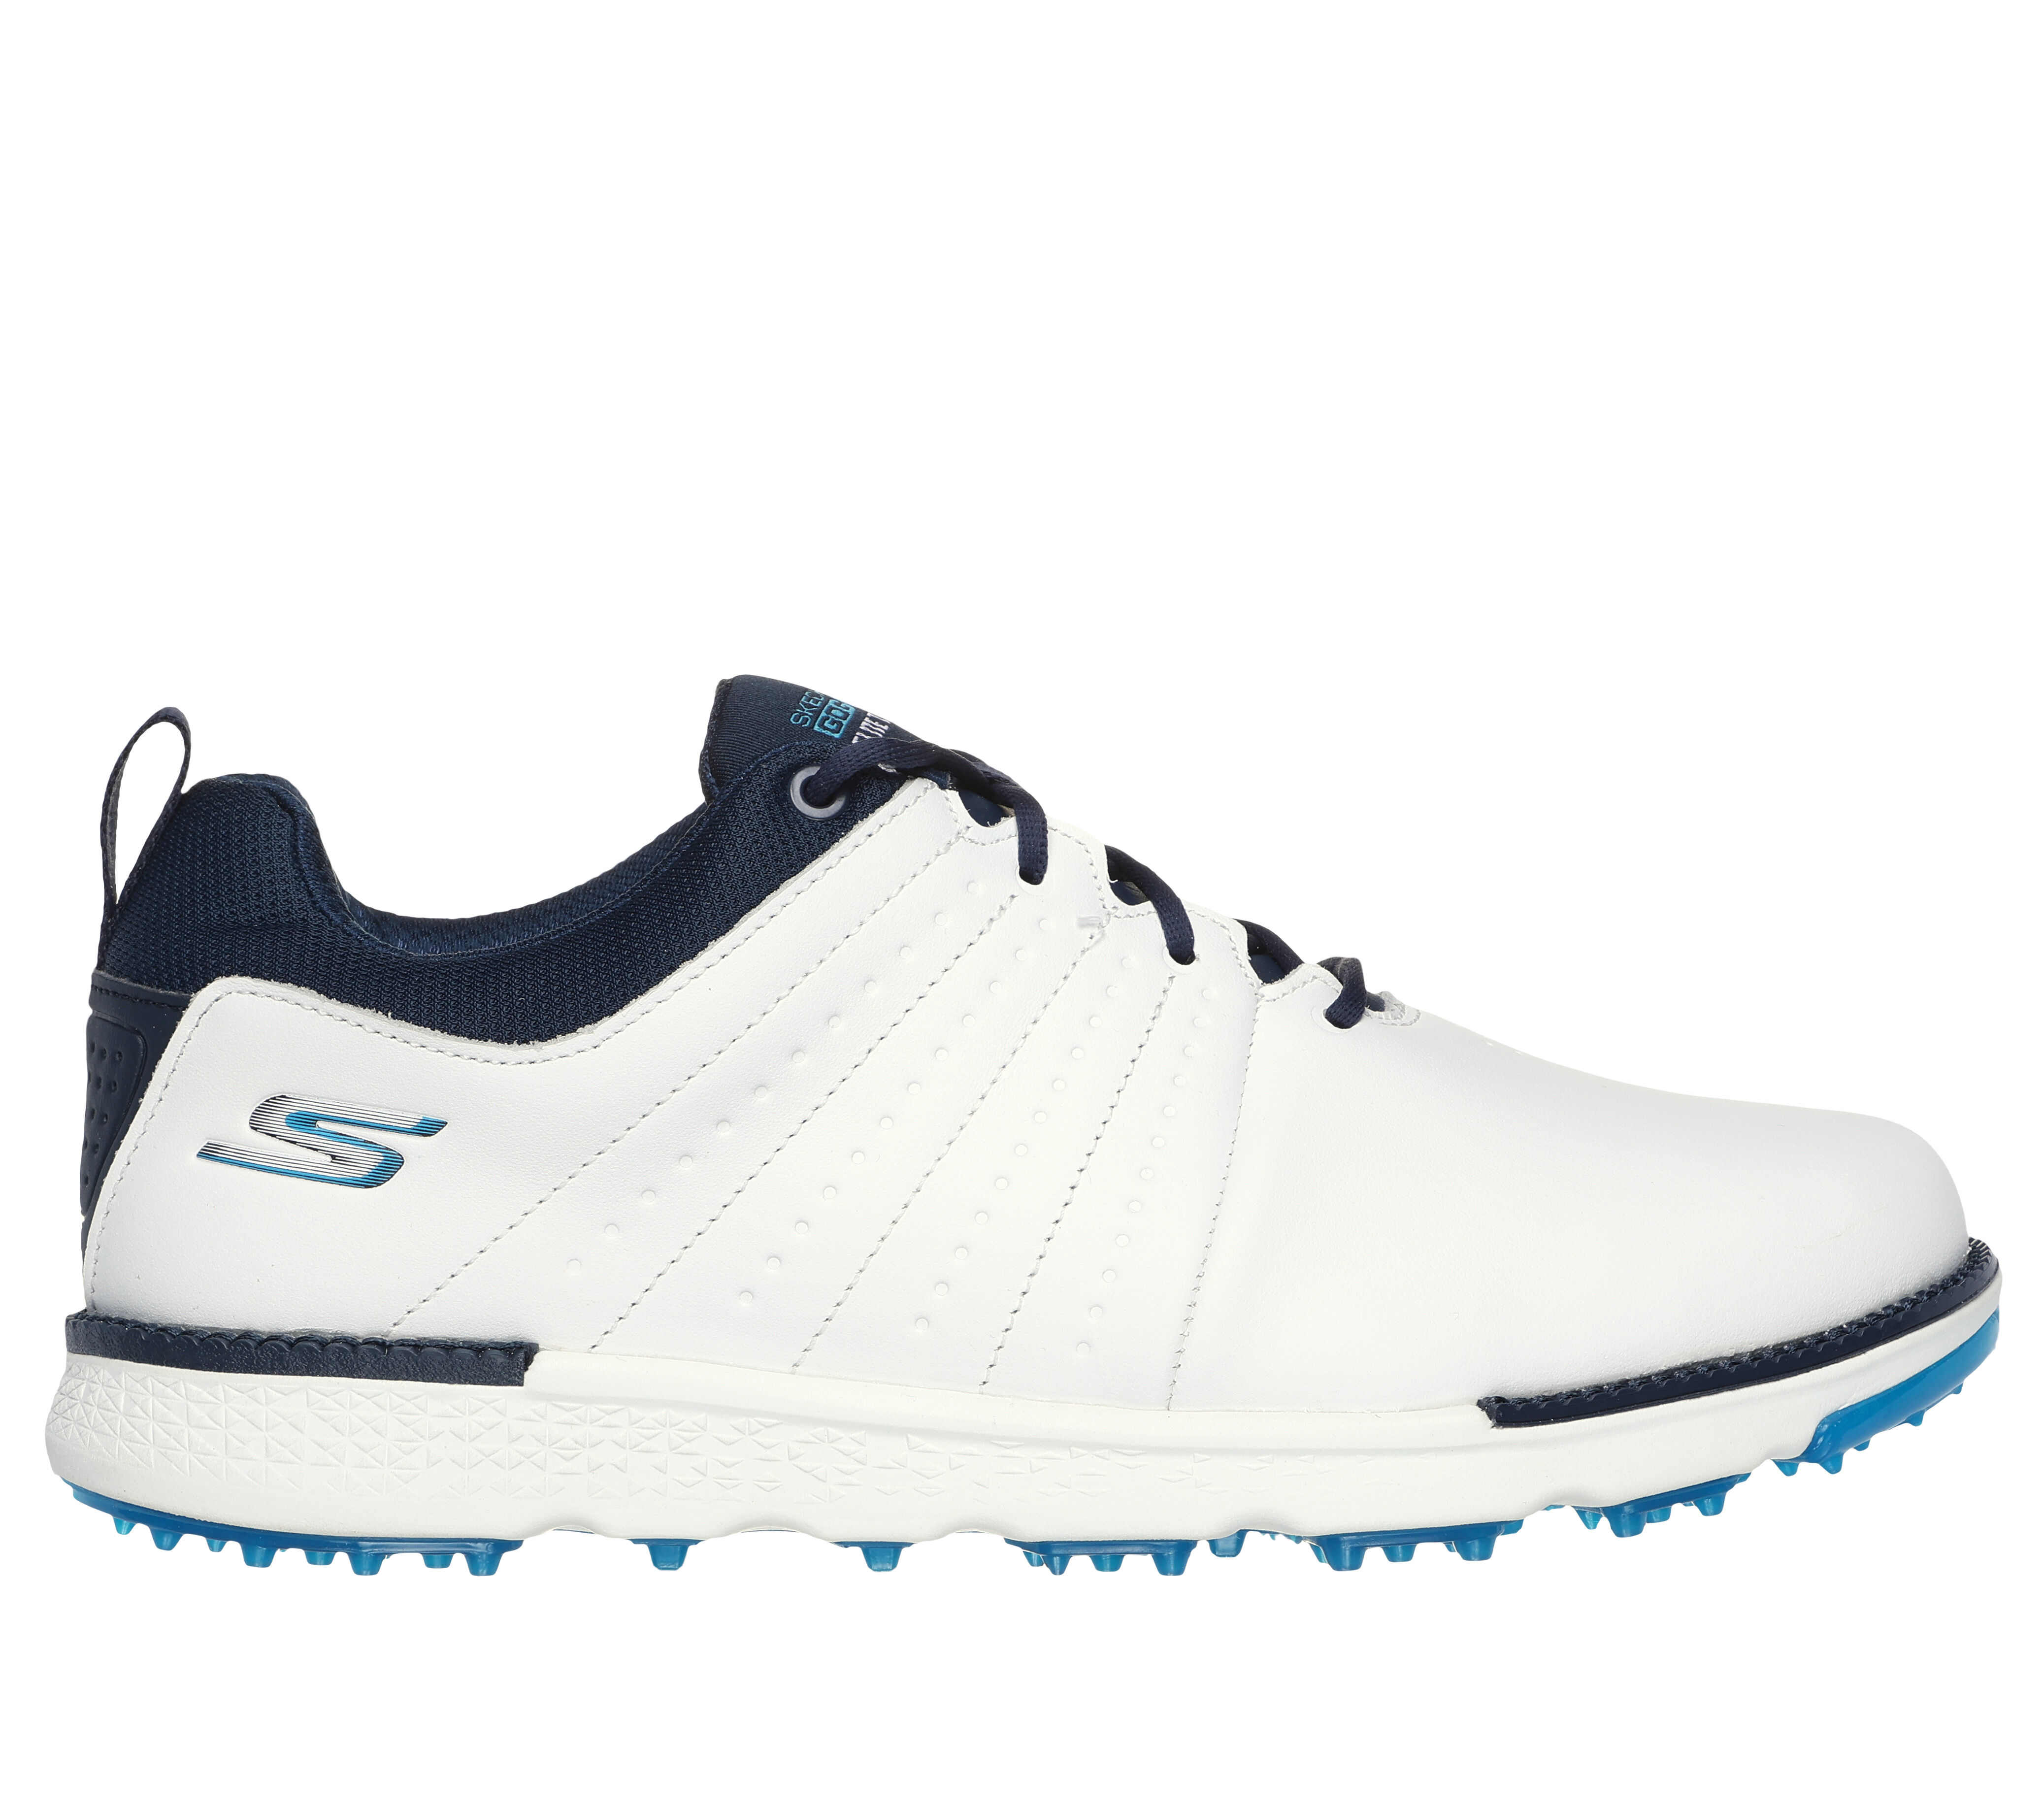 skechers golf shoes for sale near me